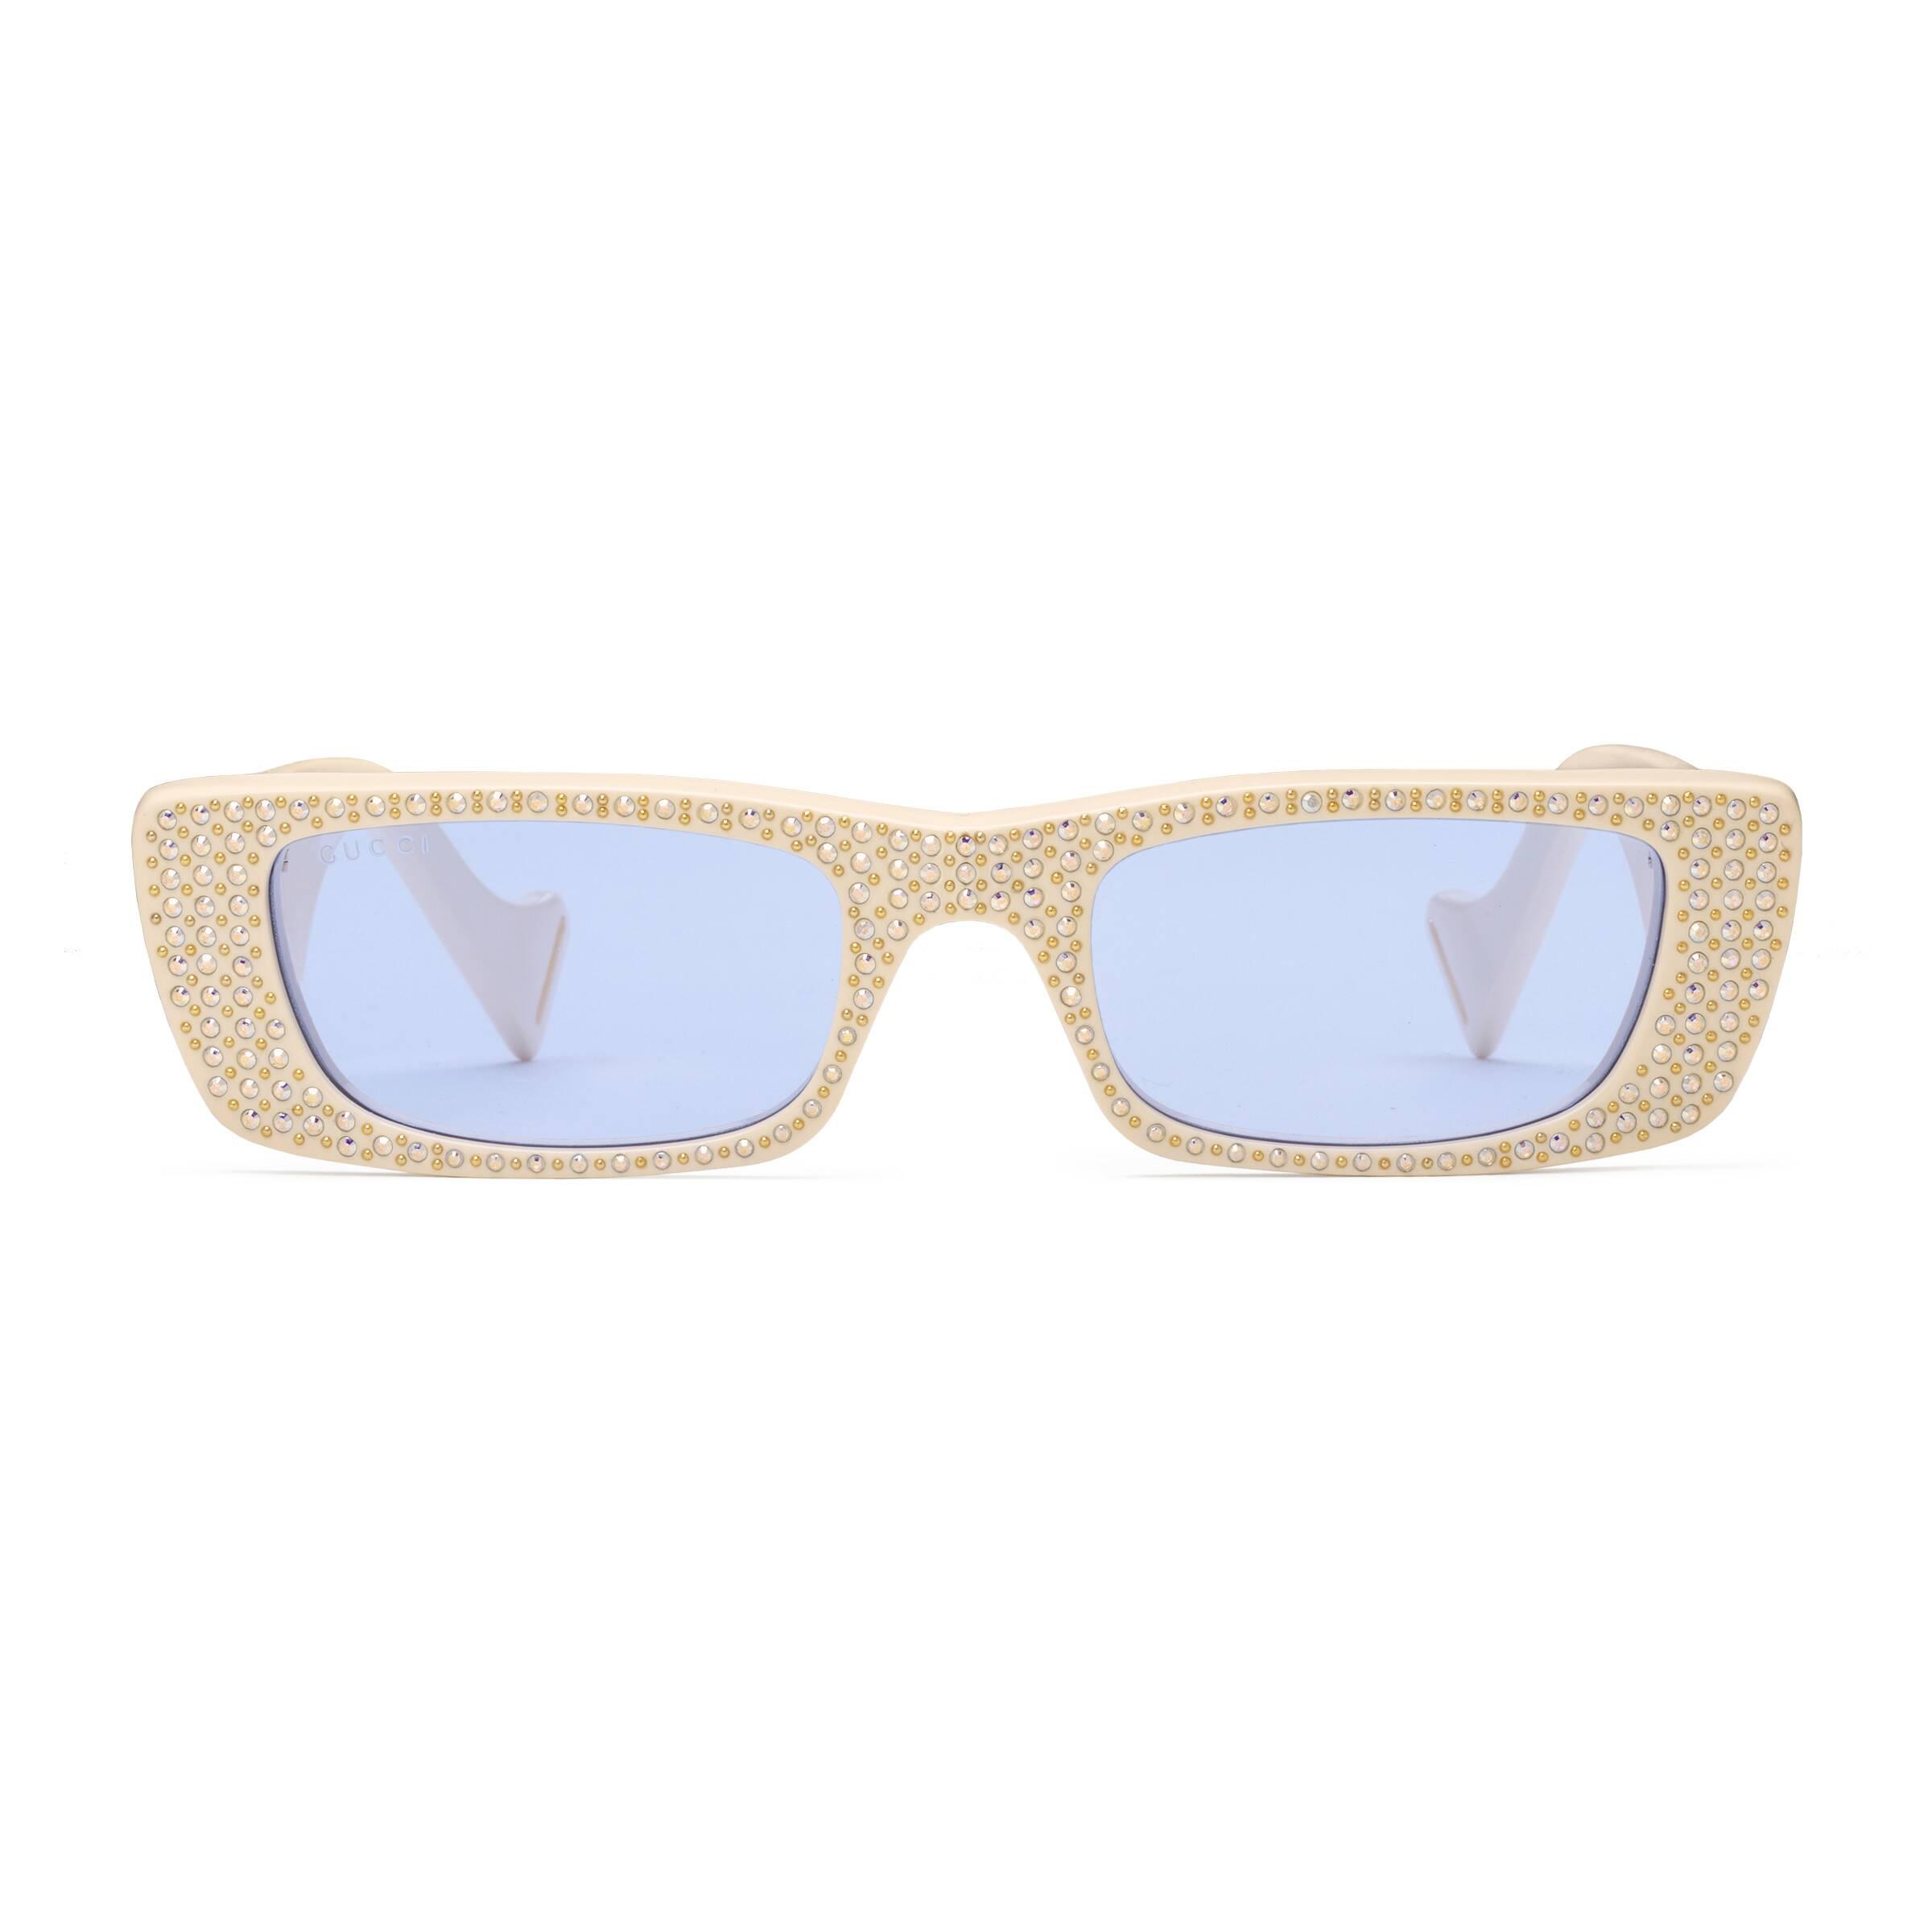 Gucci Velvet Rectangular Sunglasses With Crystals in White - Lyst